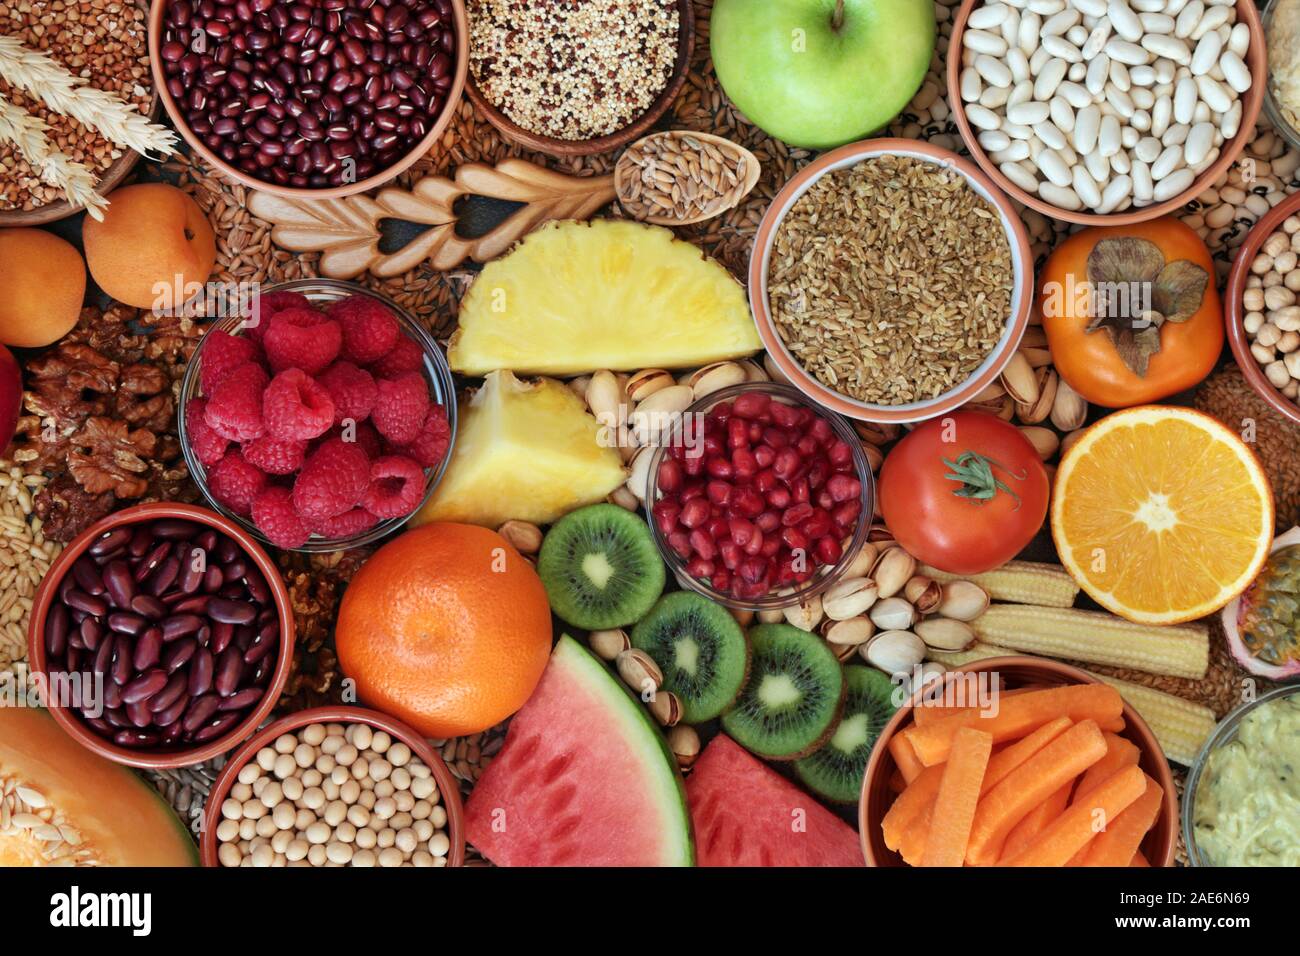 High fibre health food concept with super foods high in antioxidants, omega 3, vitamins &  protein with low GI levels for diabetics. Stock Photo